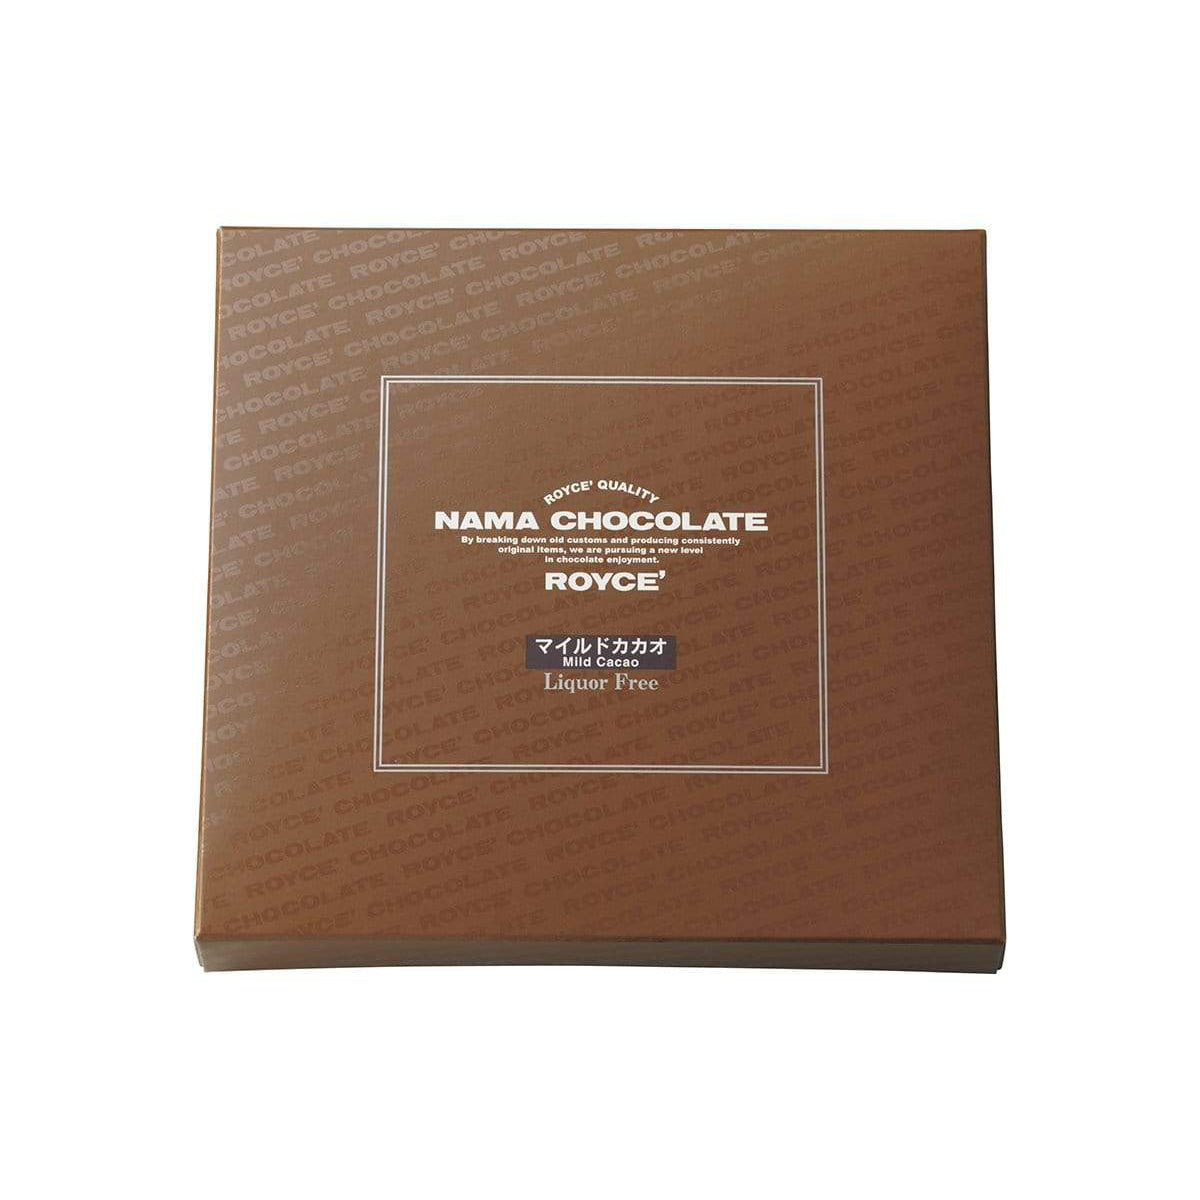 ROYCE' Chocolate - Nama Chocolate "Mild Cacao" - Image shows a brown box with white text inside white square saying ROYCE' Quality Nama Chocolate By breaking down old customs and producing consistently original items, we are pursuing a new level in chocolate enjoyment. ROYCE' Mild Cacao Liquor Free. 